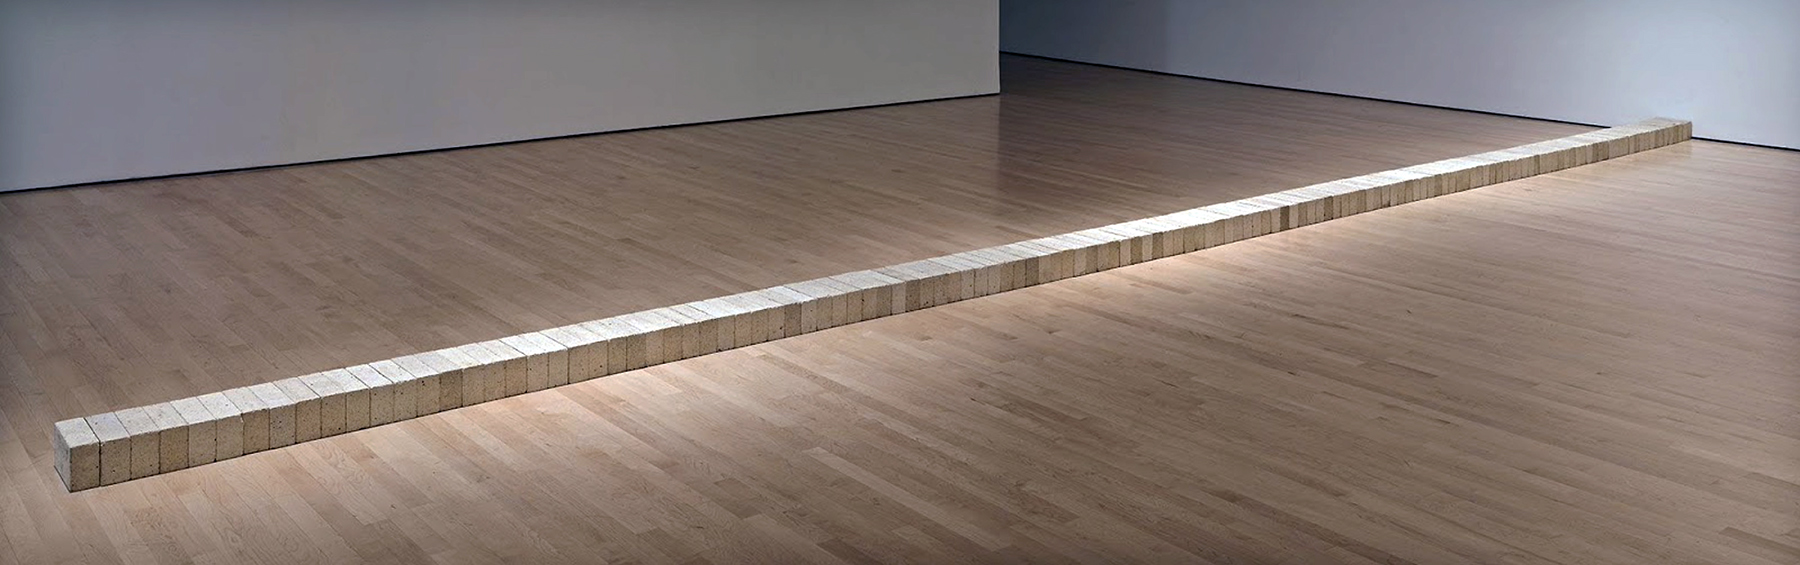 Carl Andre, Lever, 1966 © Estate of Carl Andre (low resolution file)